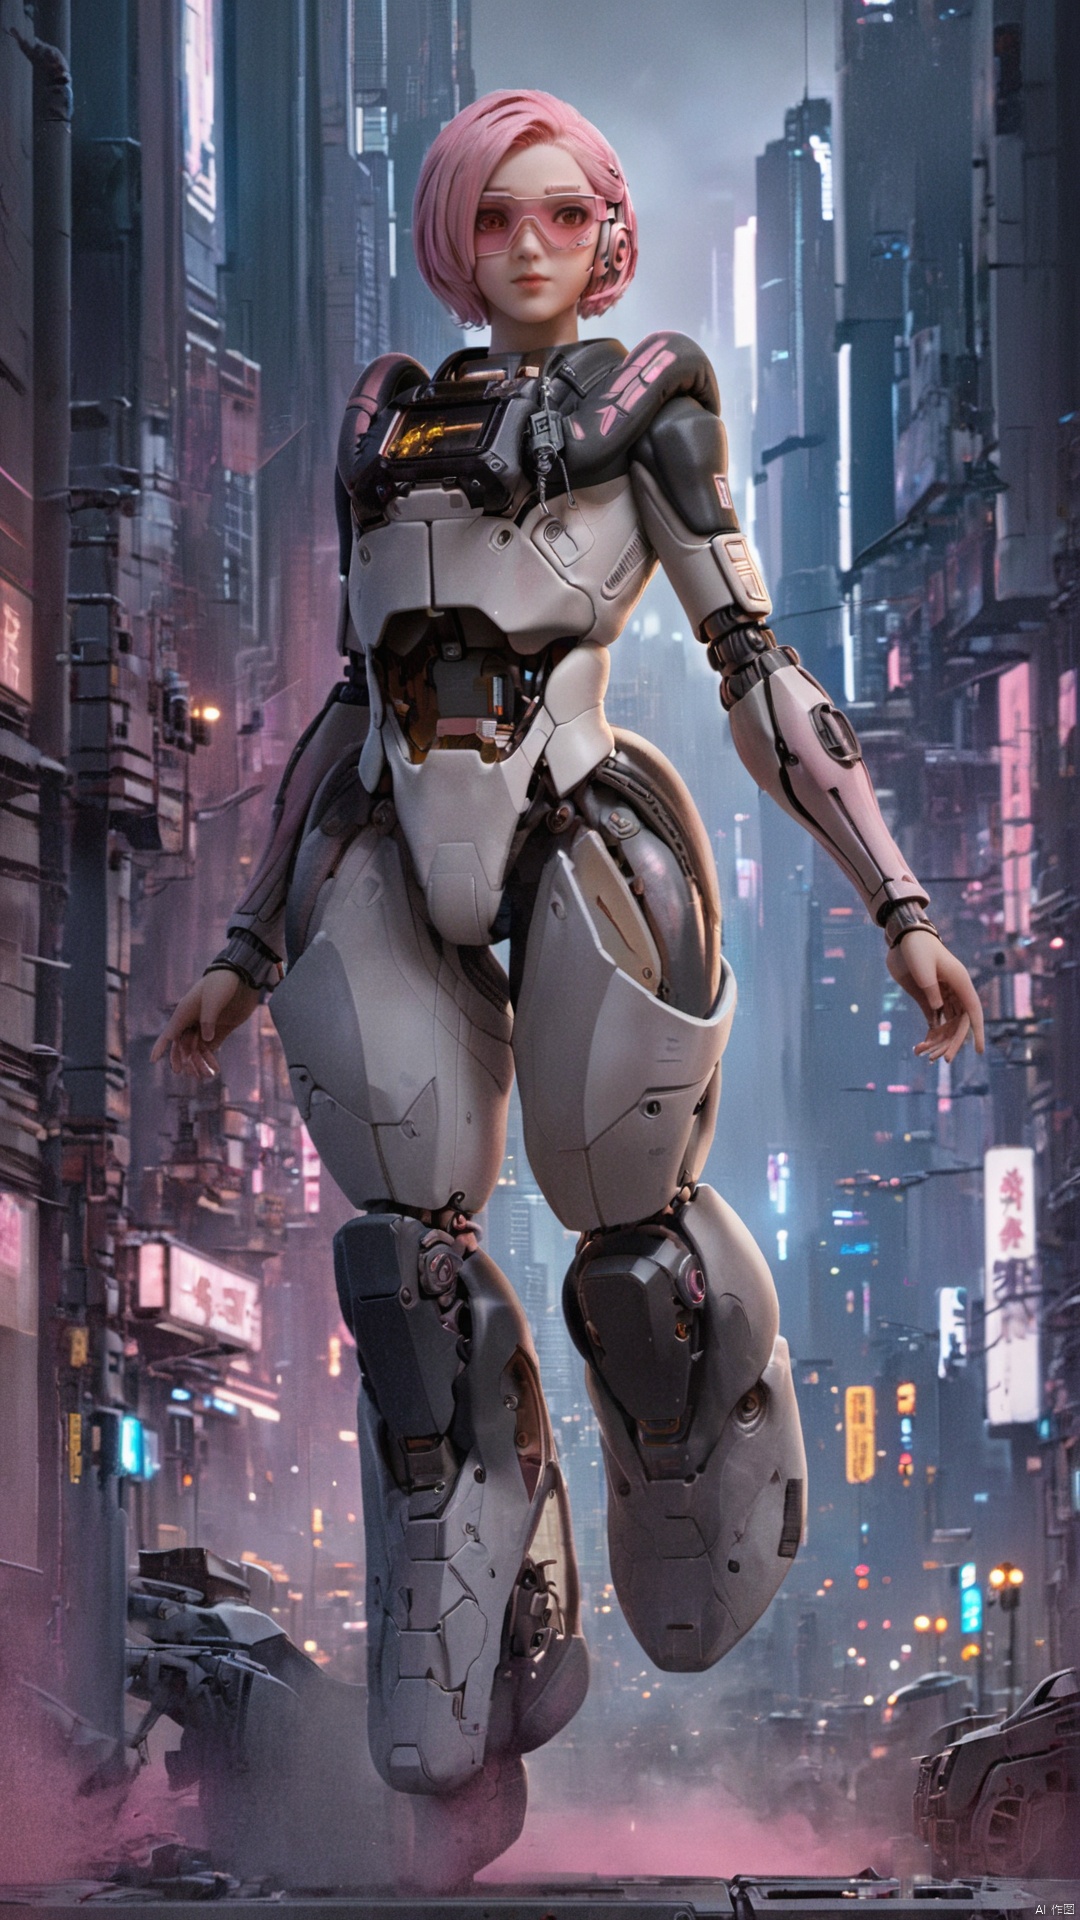  1 girl, solo, short hair, pink split short hair, pink eyes, elegant, sci-fi style, pink hair, bodysuit, cyberpunk style, wearing a white mech and pink goggles,Cyberpunk's urban night view, towering buildings, and polluted atmosphere of lighting